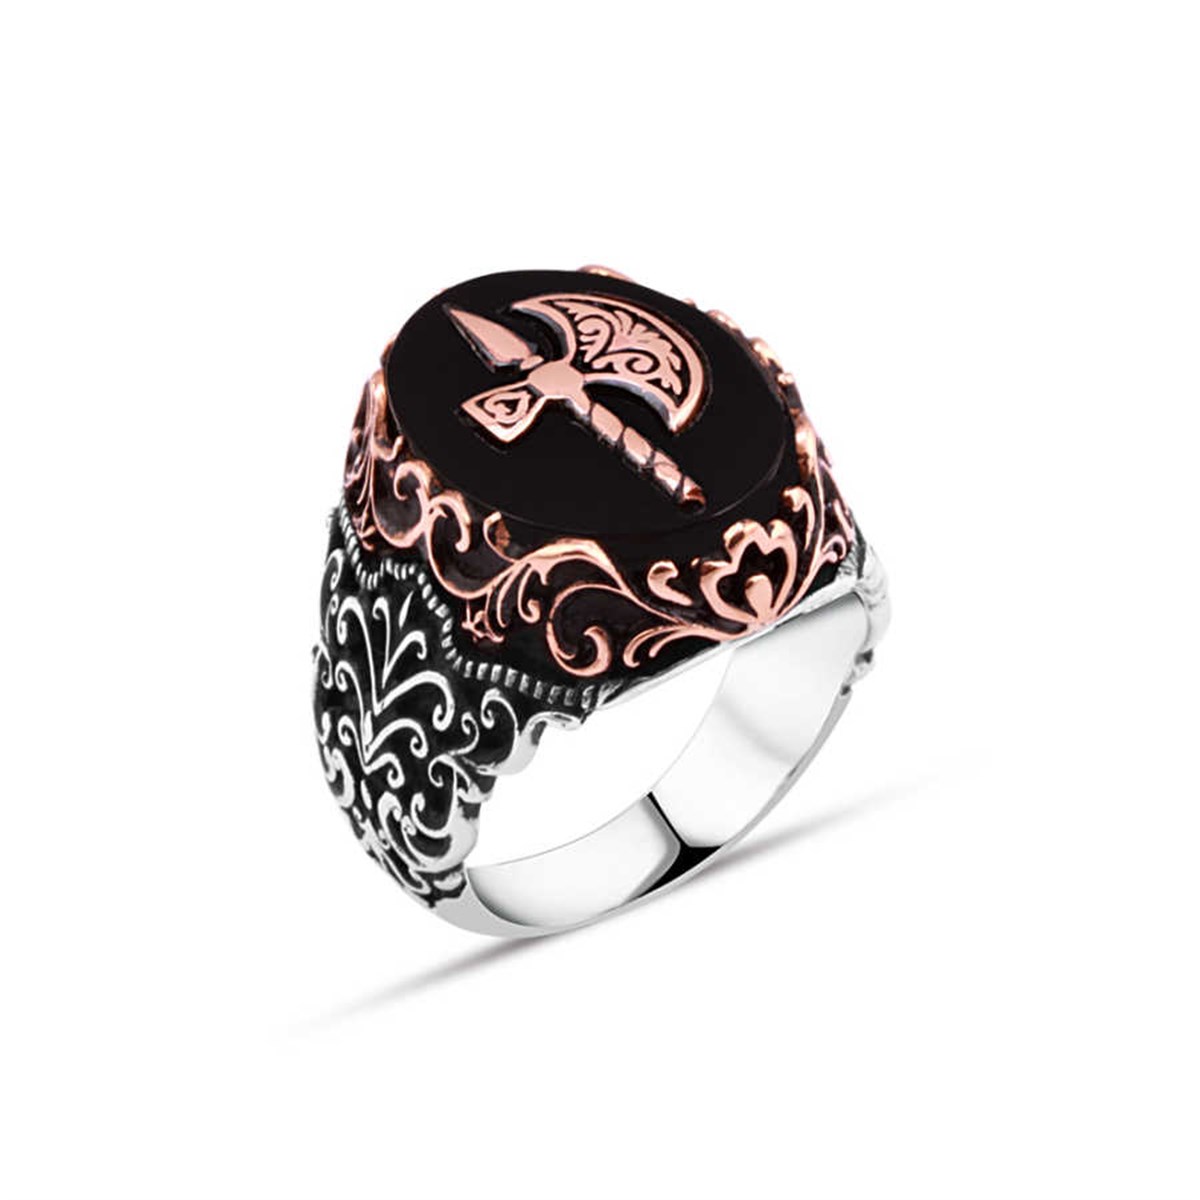 Onix Stone Ax Crest Sterling Silver Men's Ring